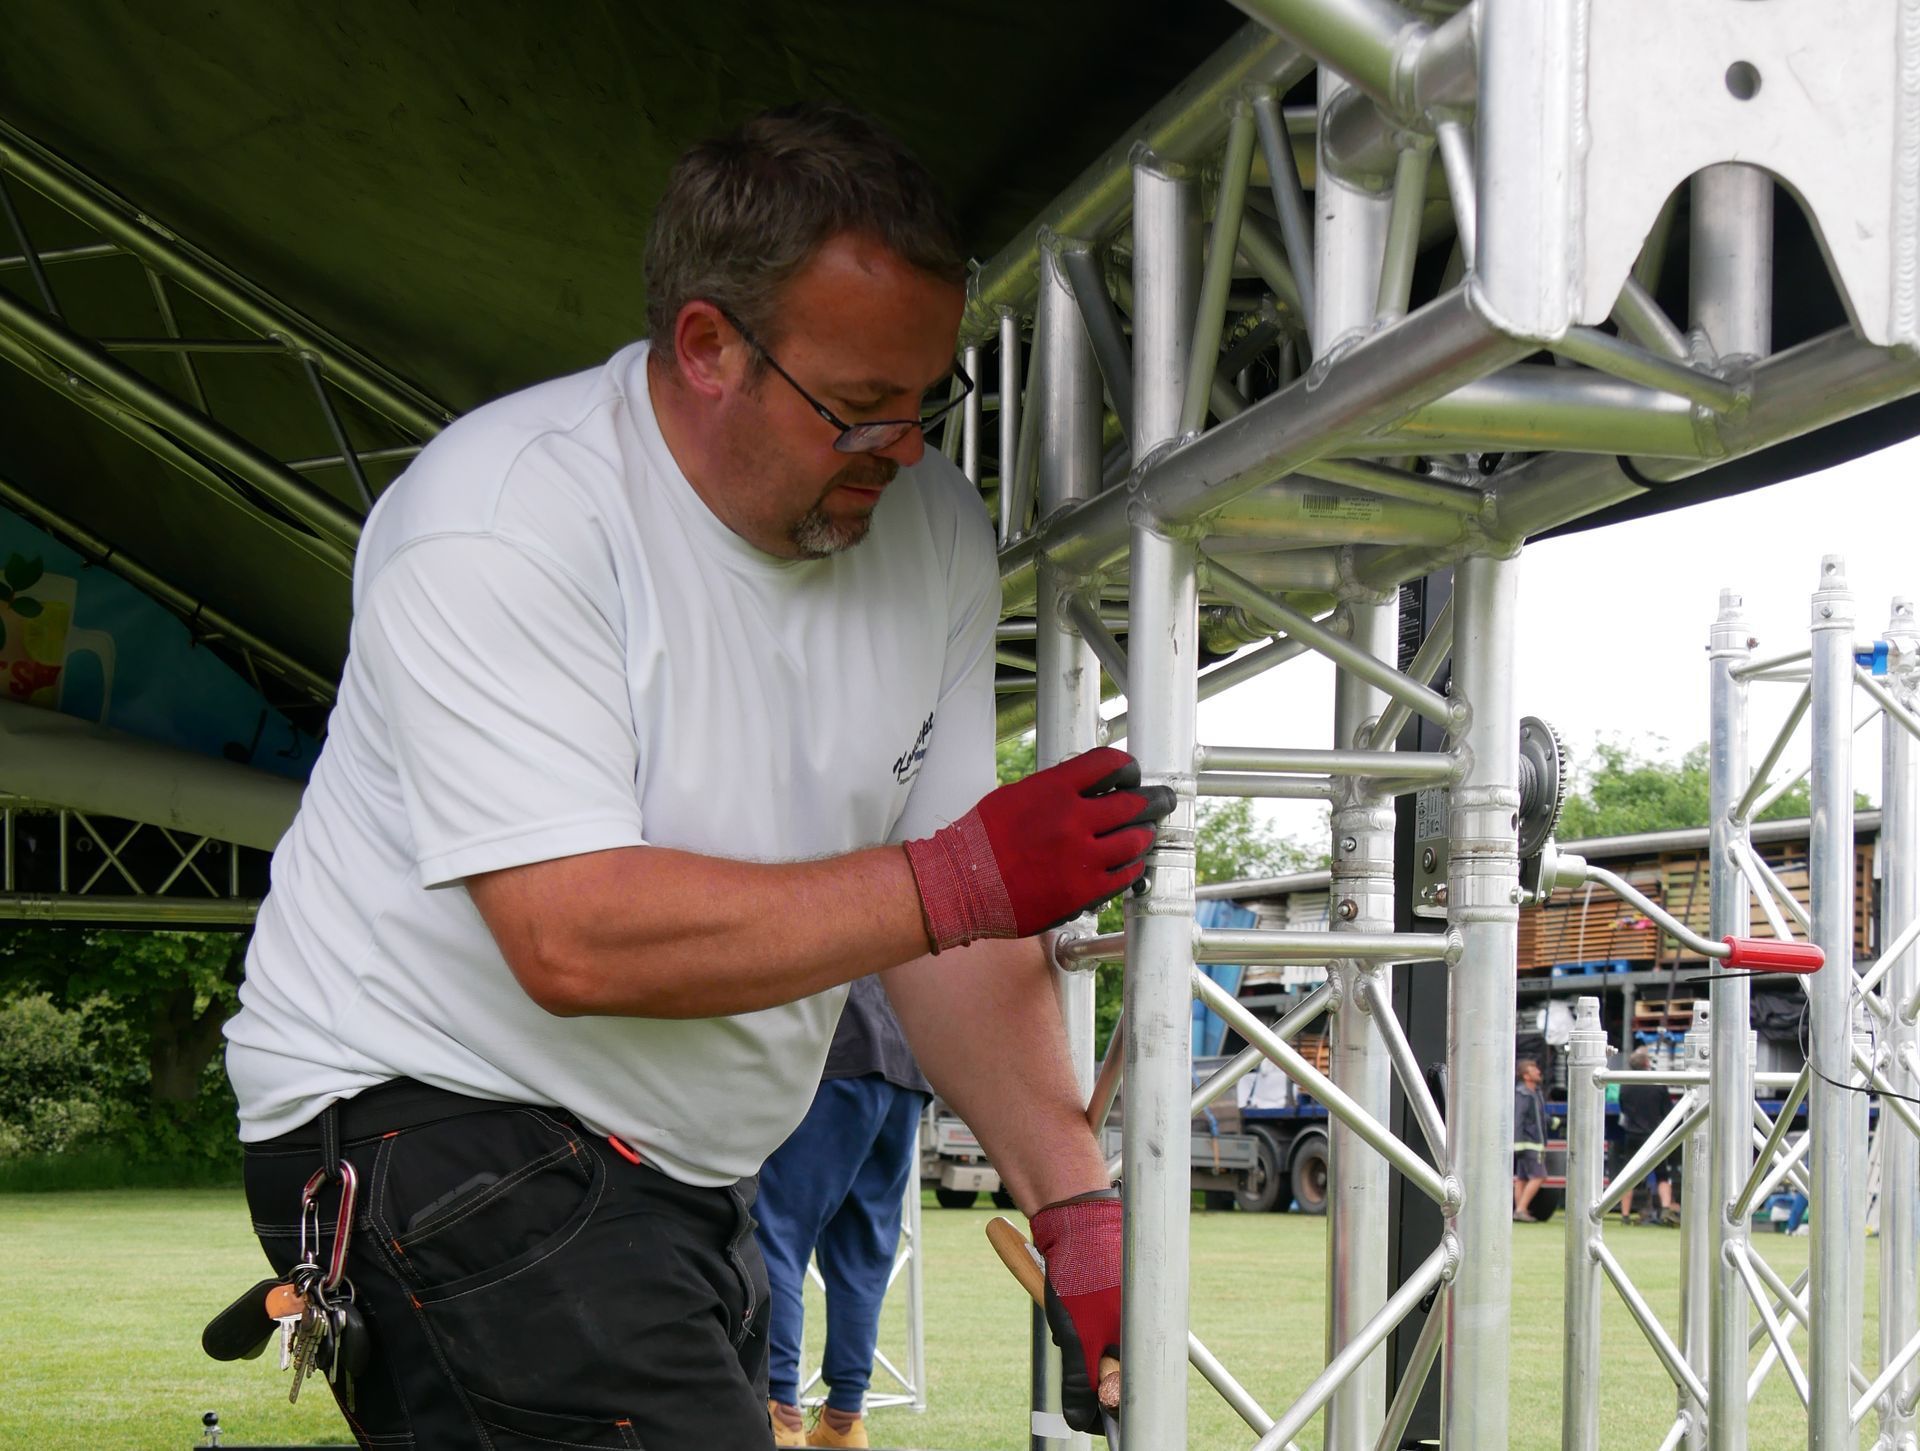 Martin at work setting up the arc truss stage at the Foodies event in St Albans